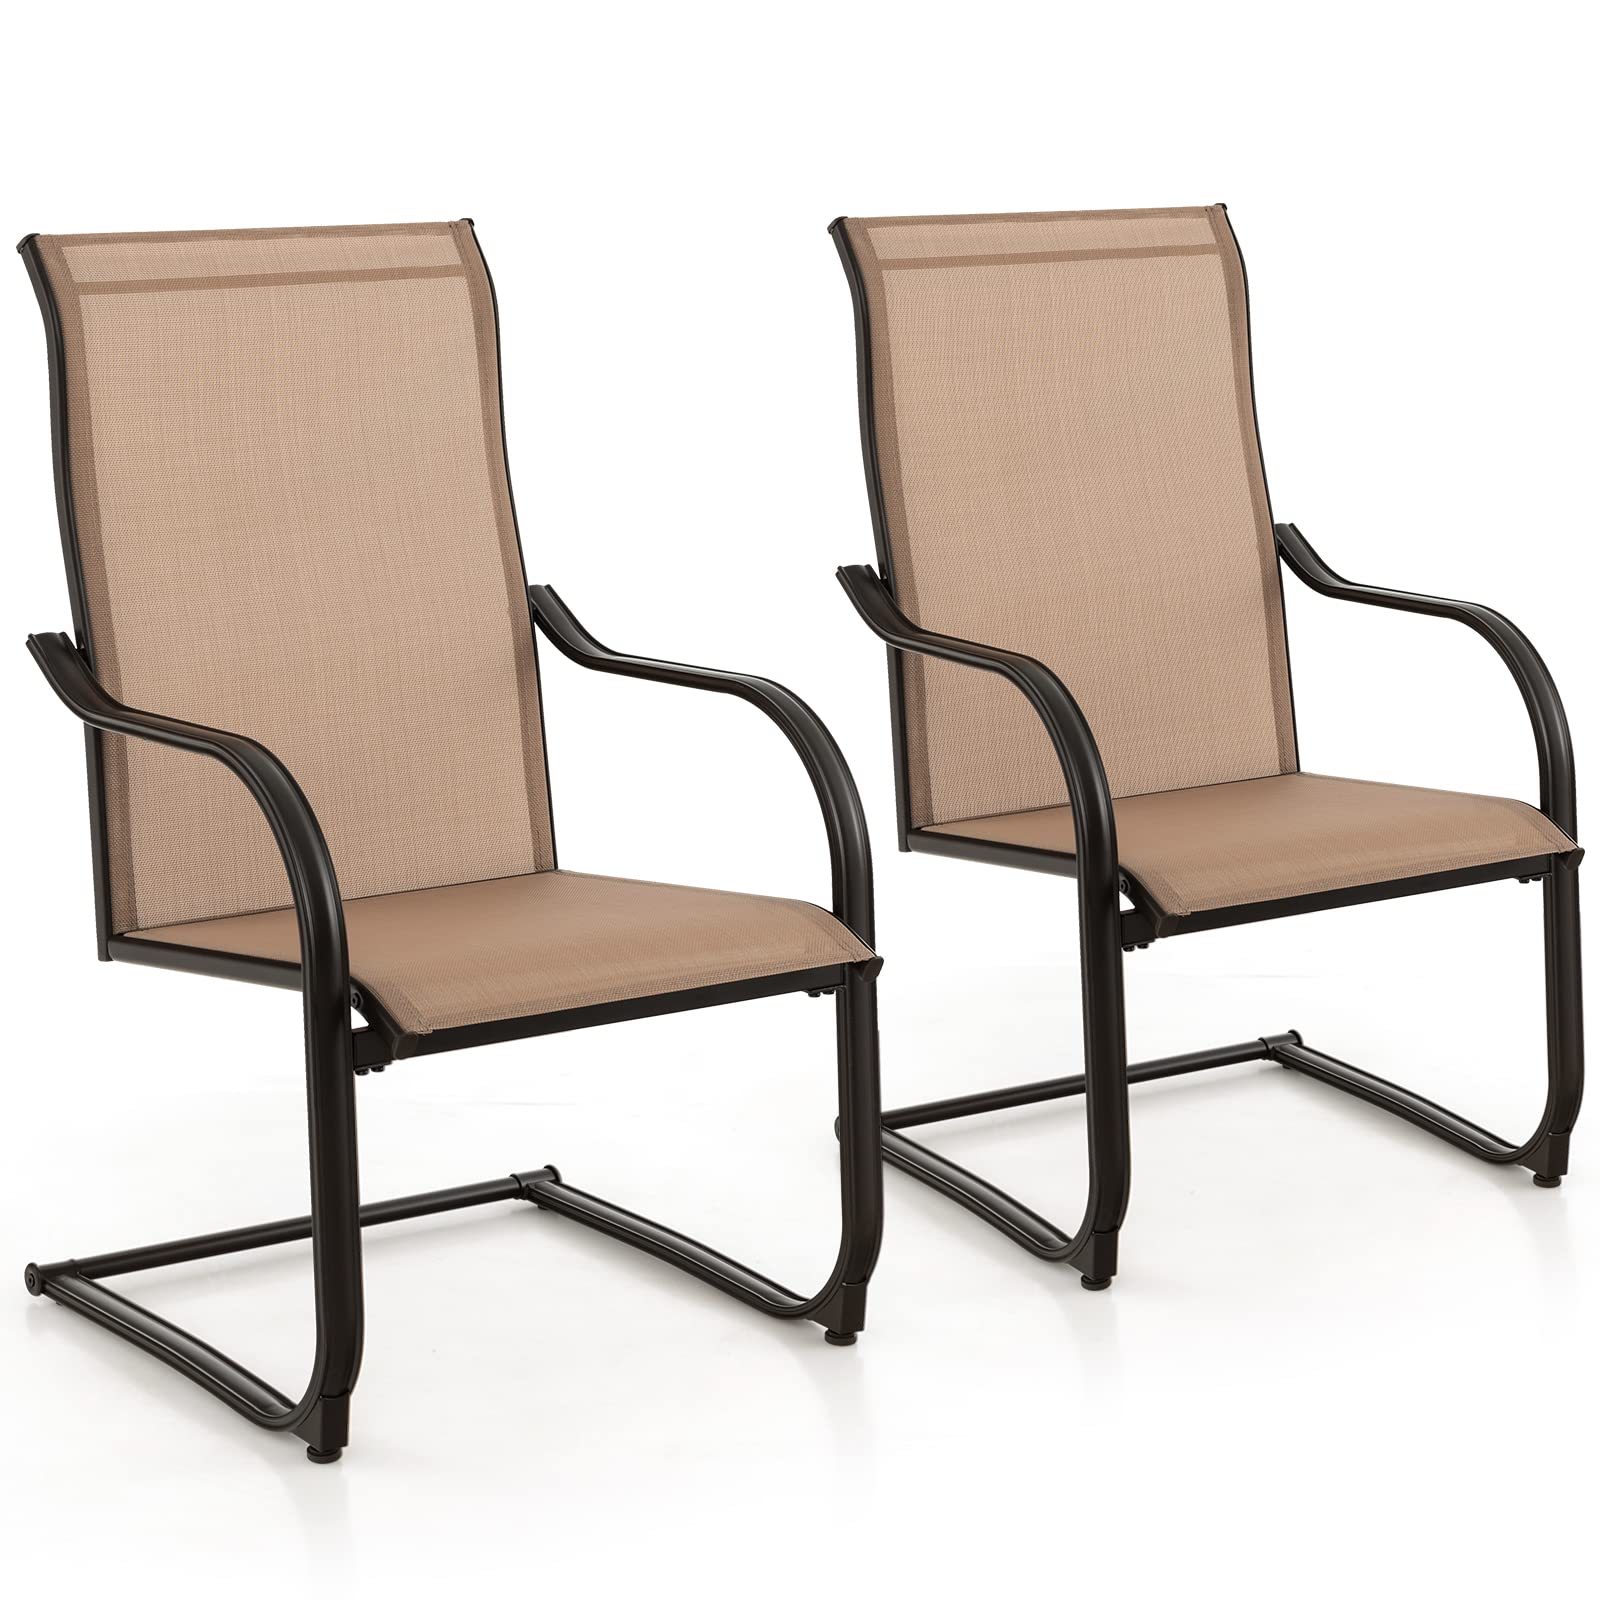 Giantex Patio Chairs Set of 2, High Back Outdoor Chairs w/Sled Base, All Weather Fabric